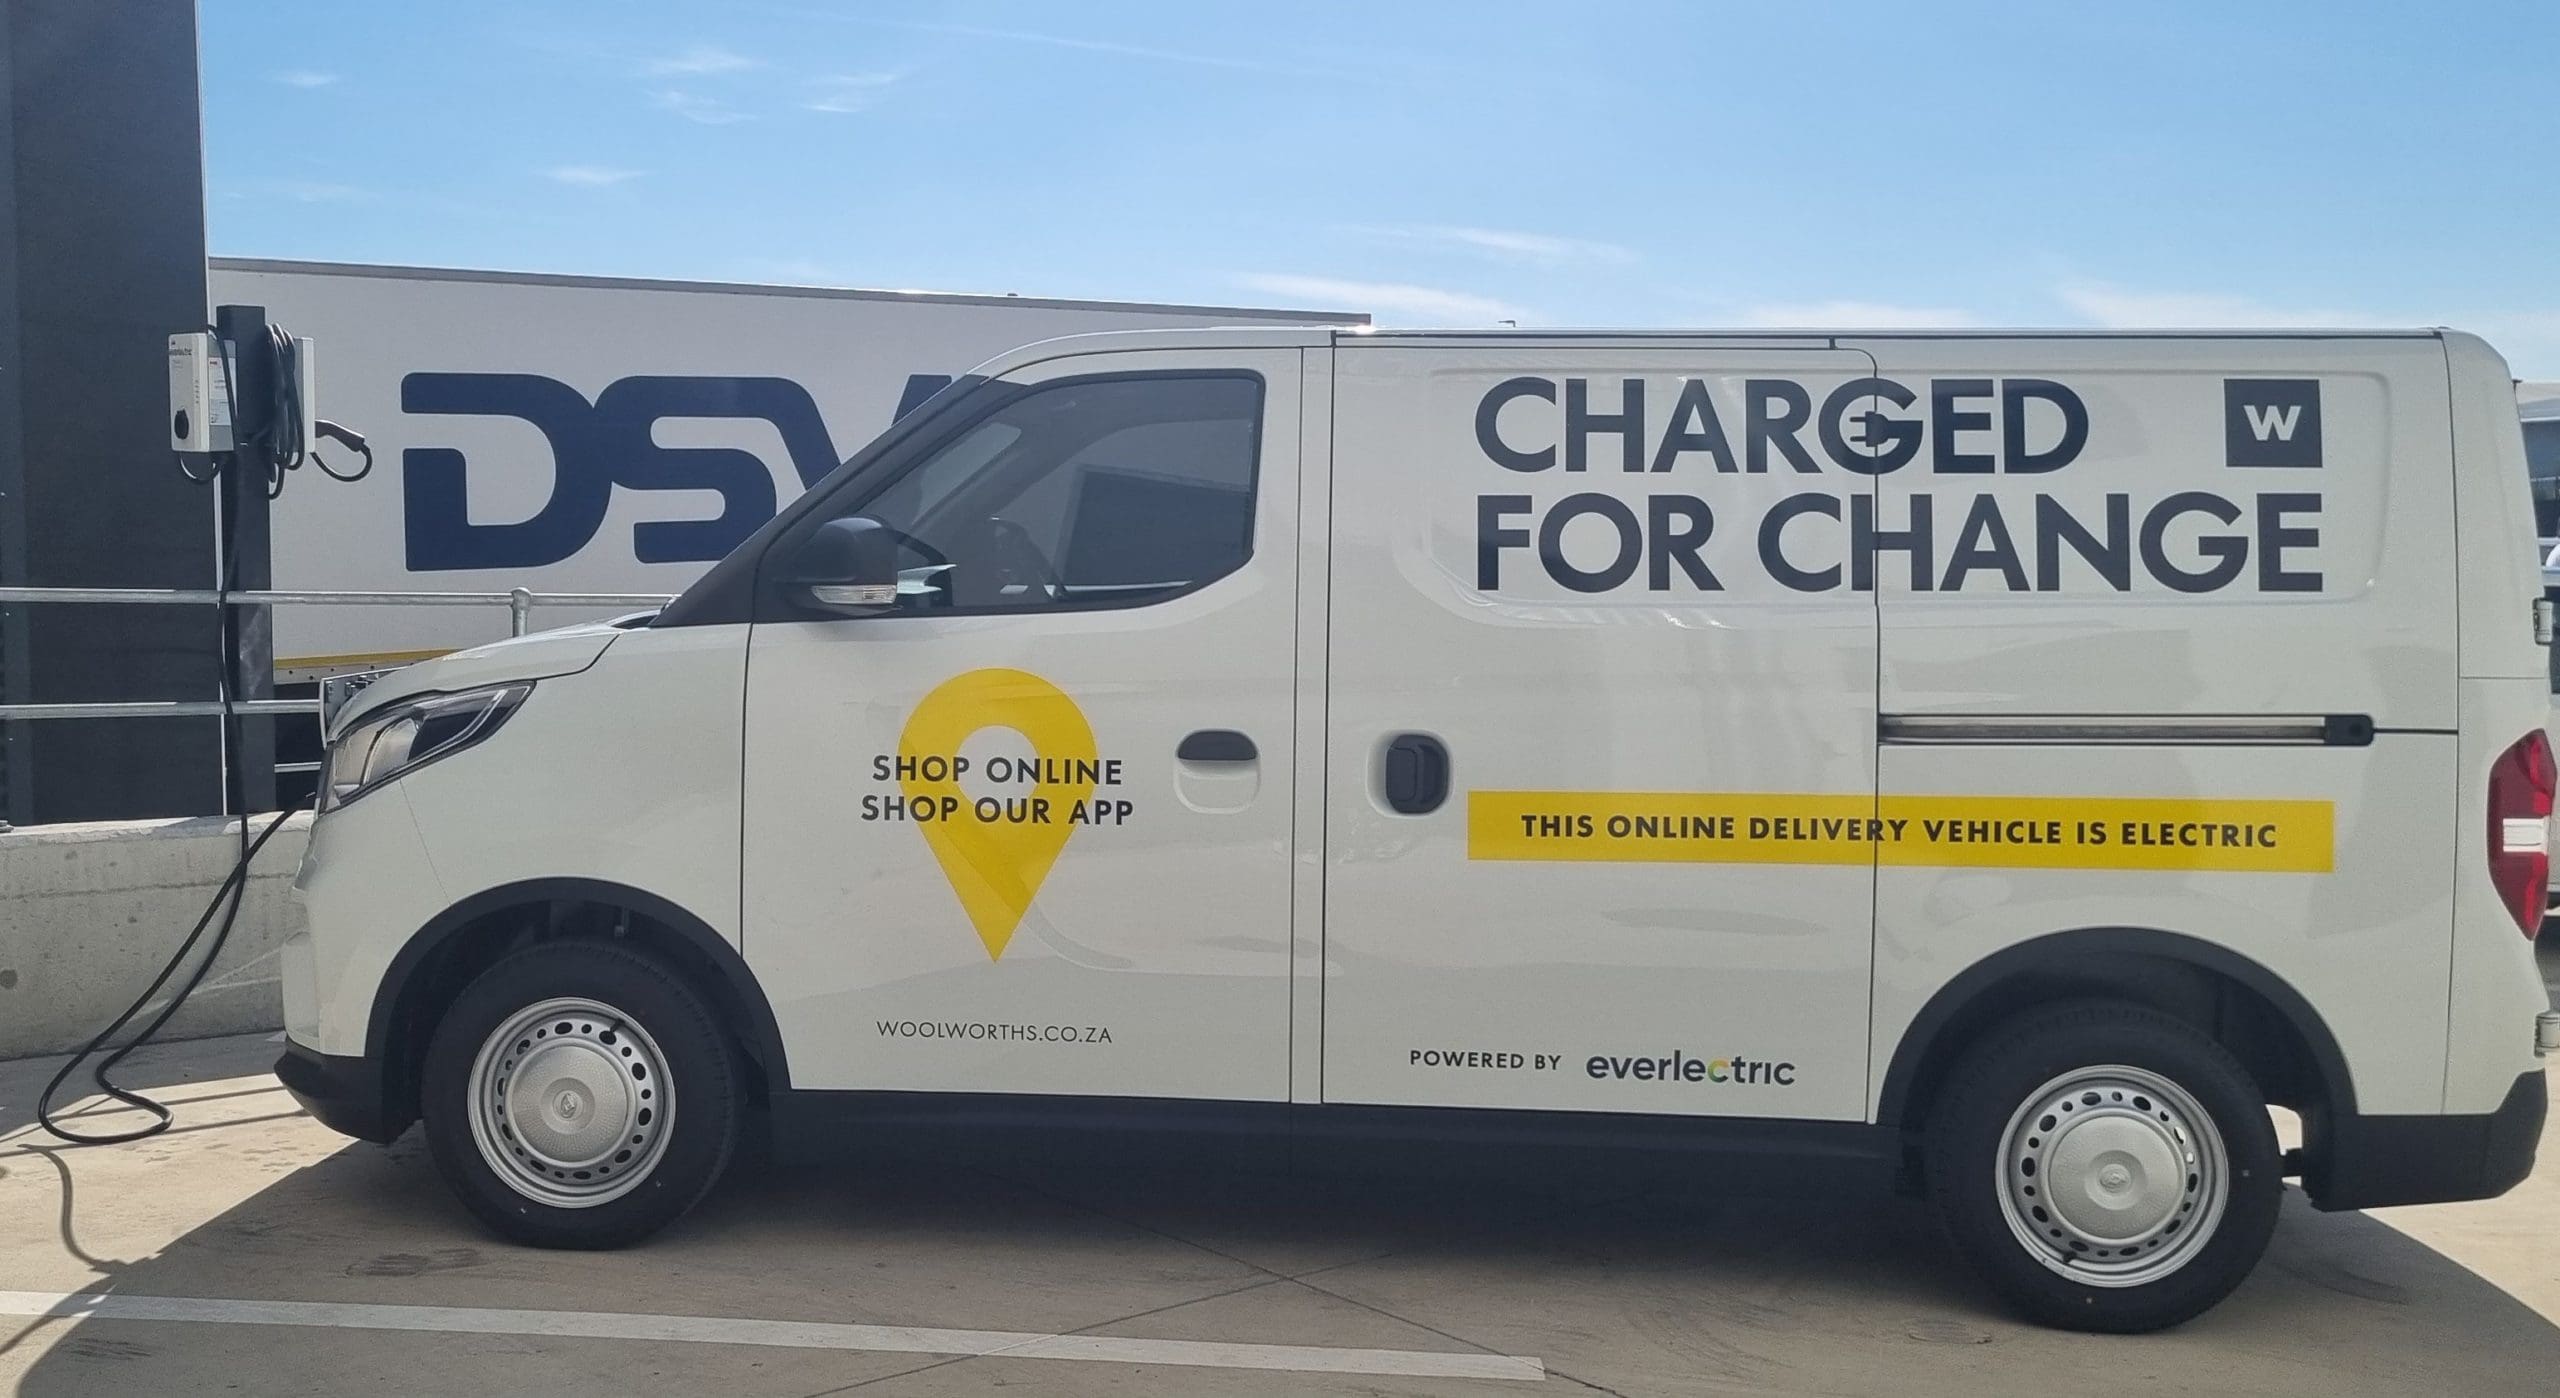 WW online delivery vehicle charging